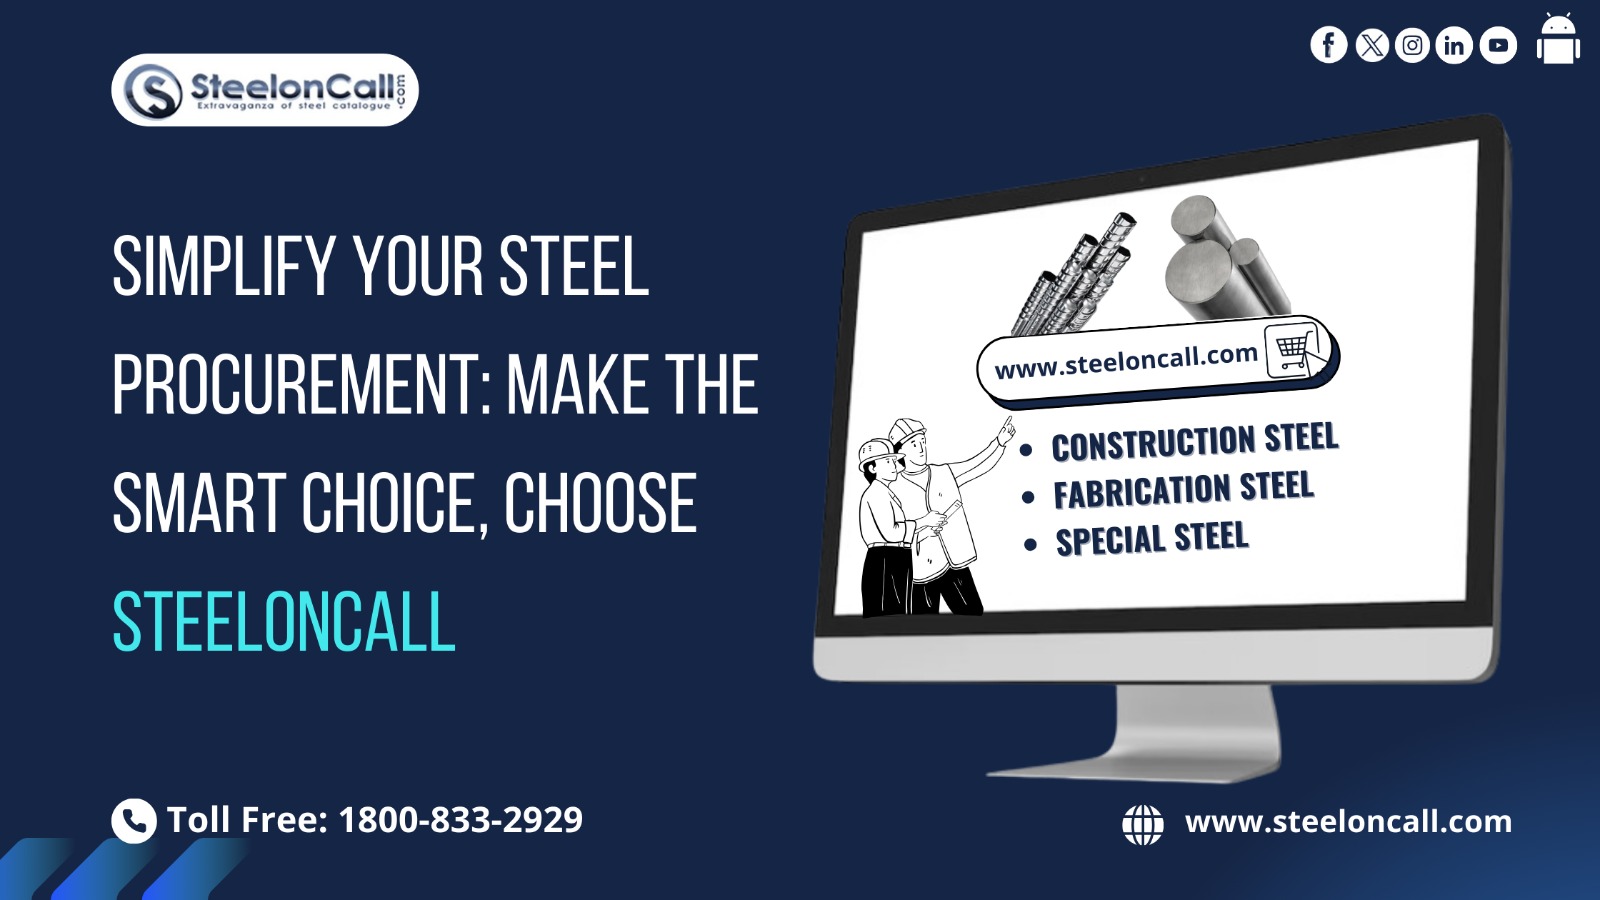 Simplify Your Steel Procurement: Make the Smart Choice, Choose Steeloncall.